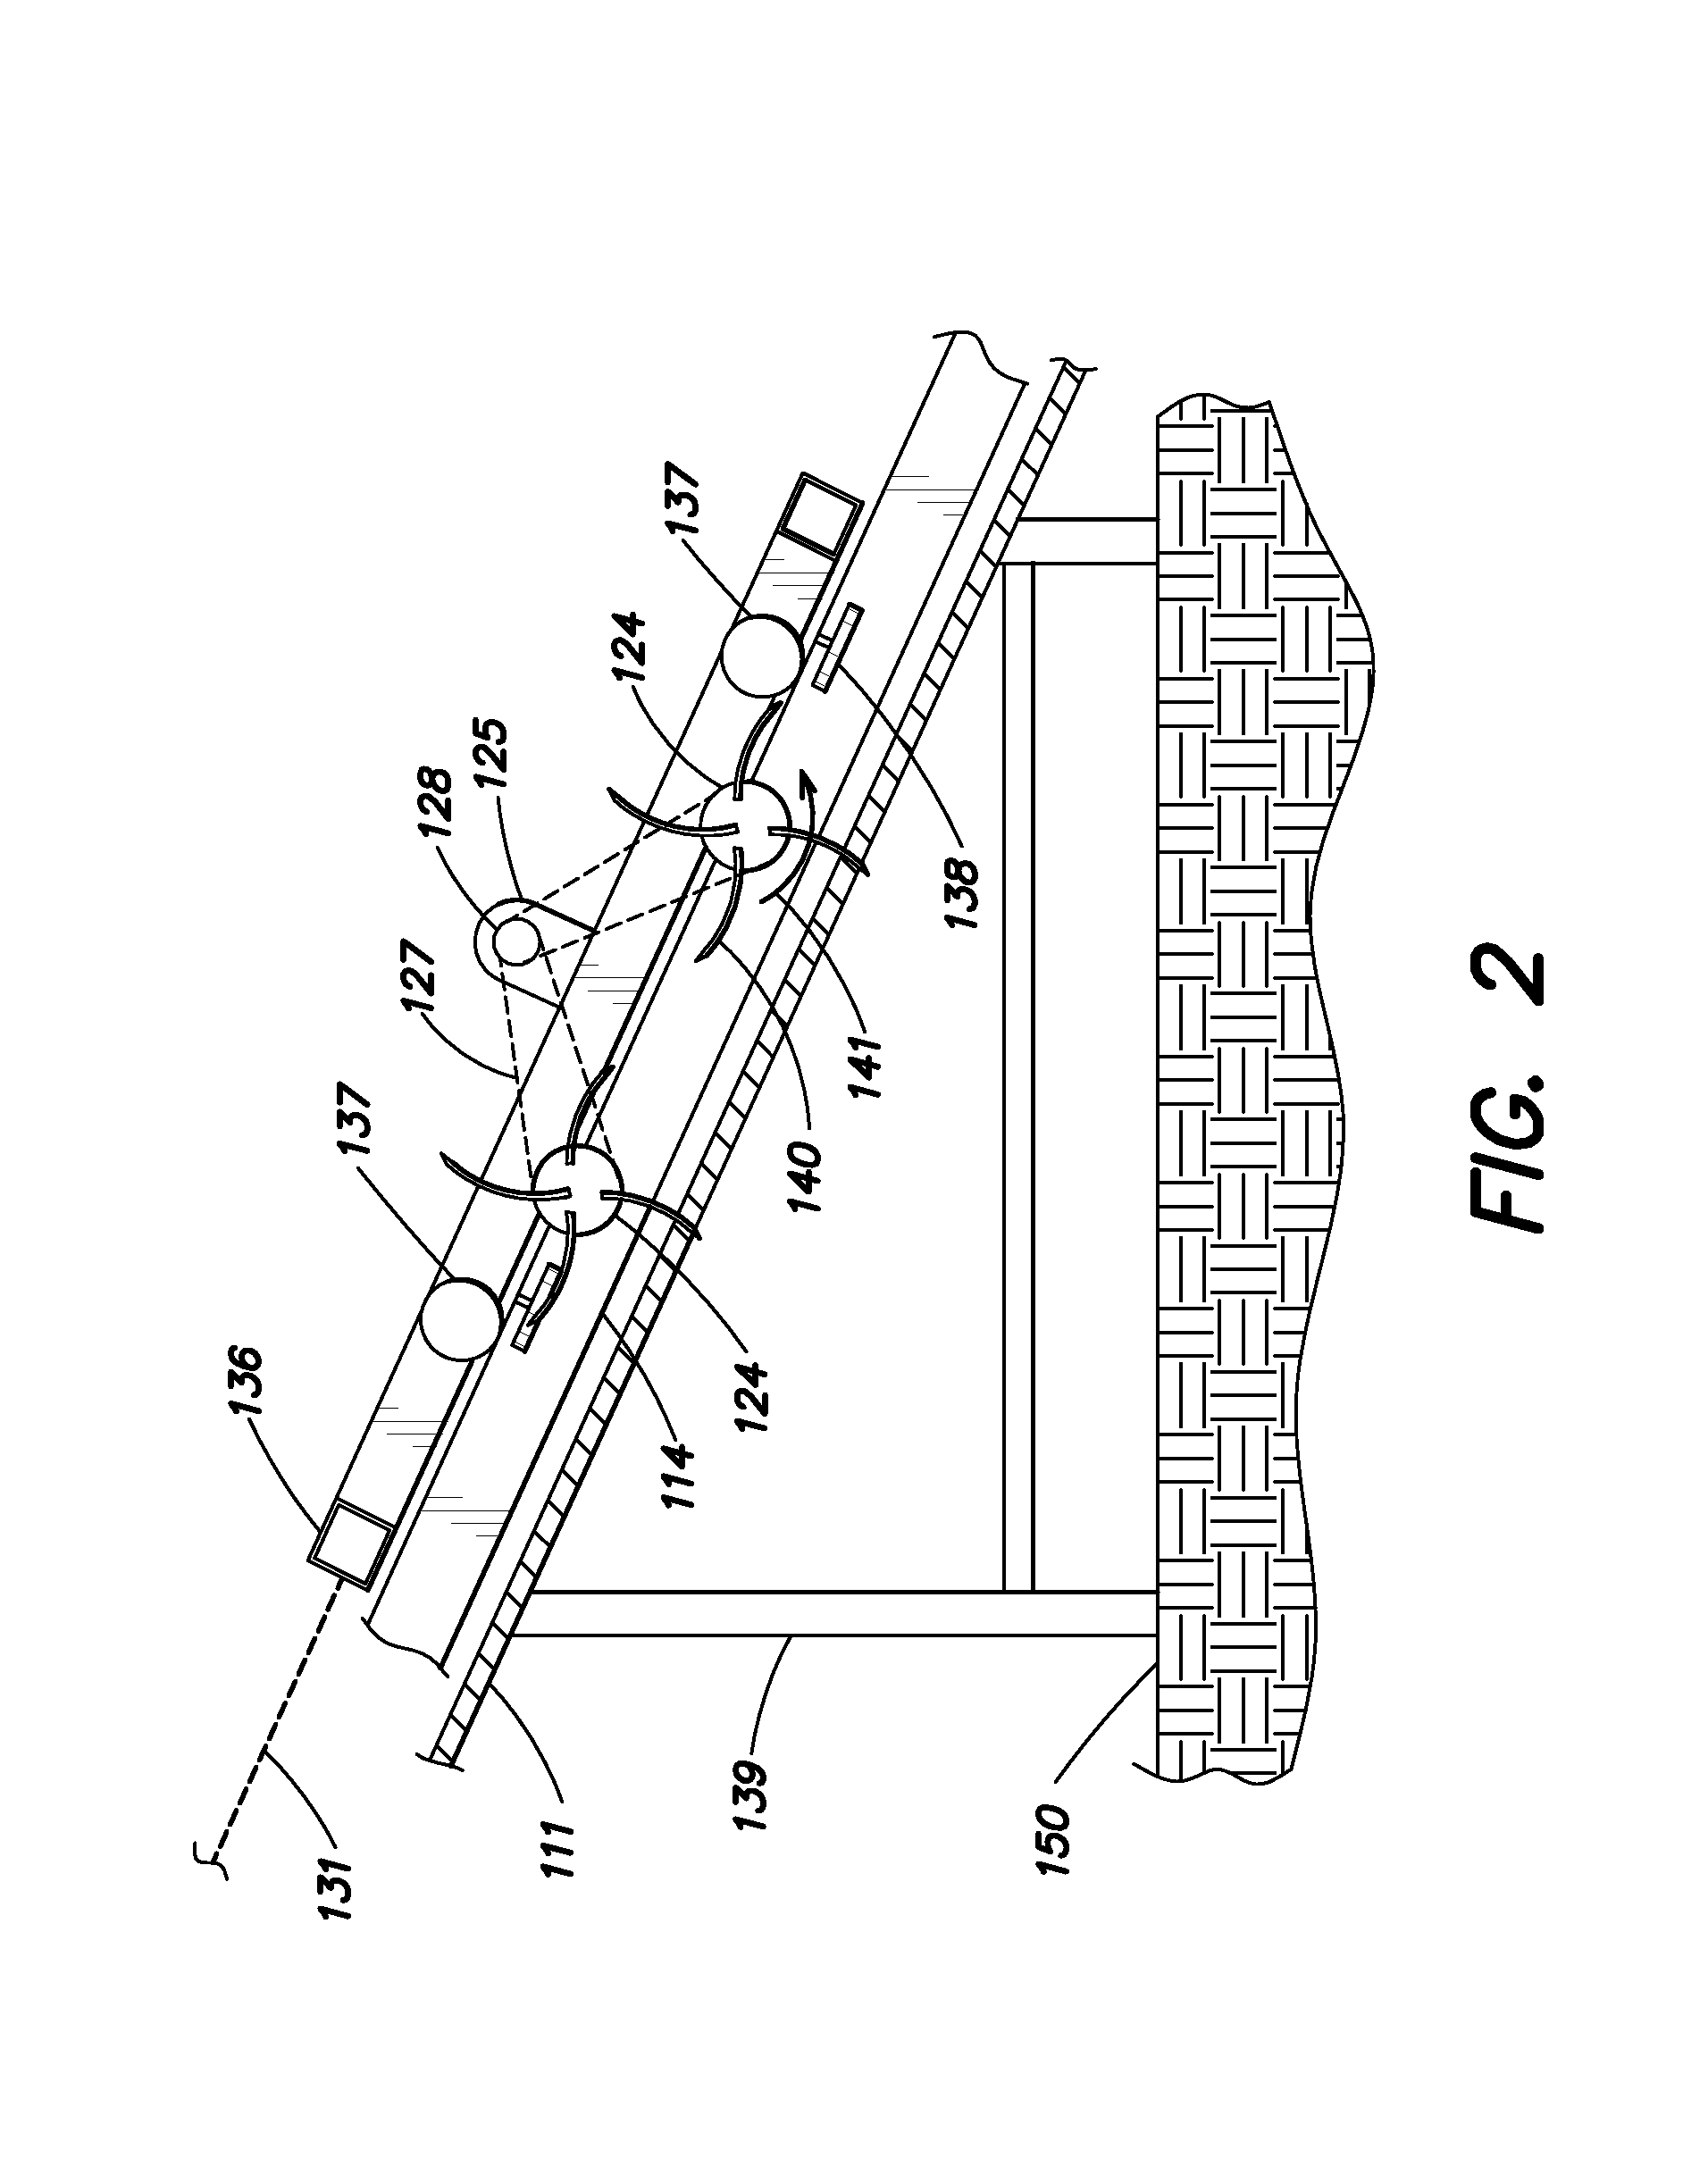 Docking and locking system for solar panel cleaning system